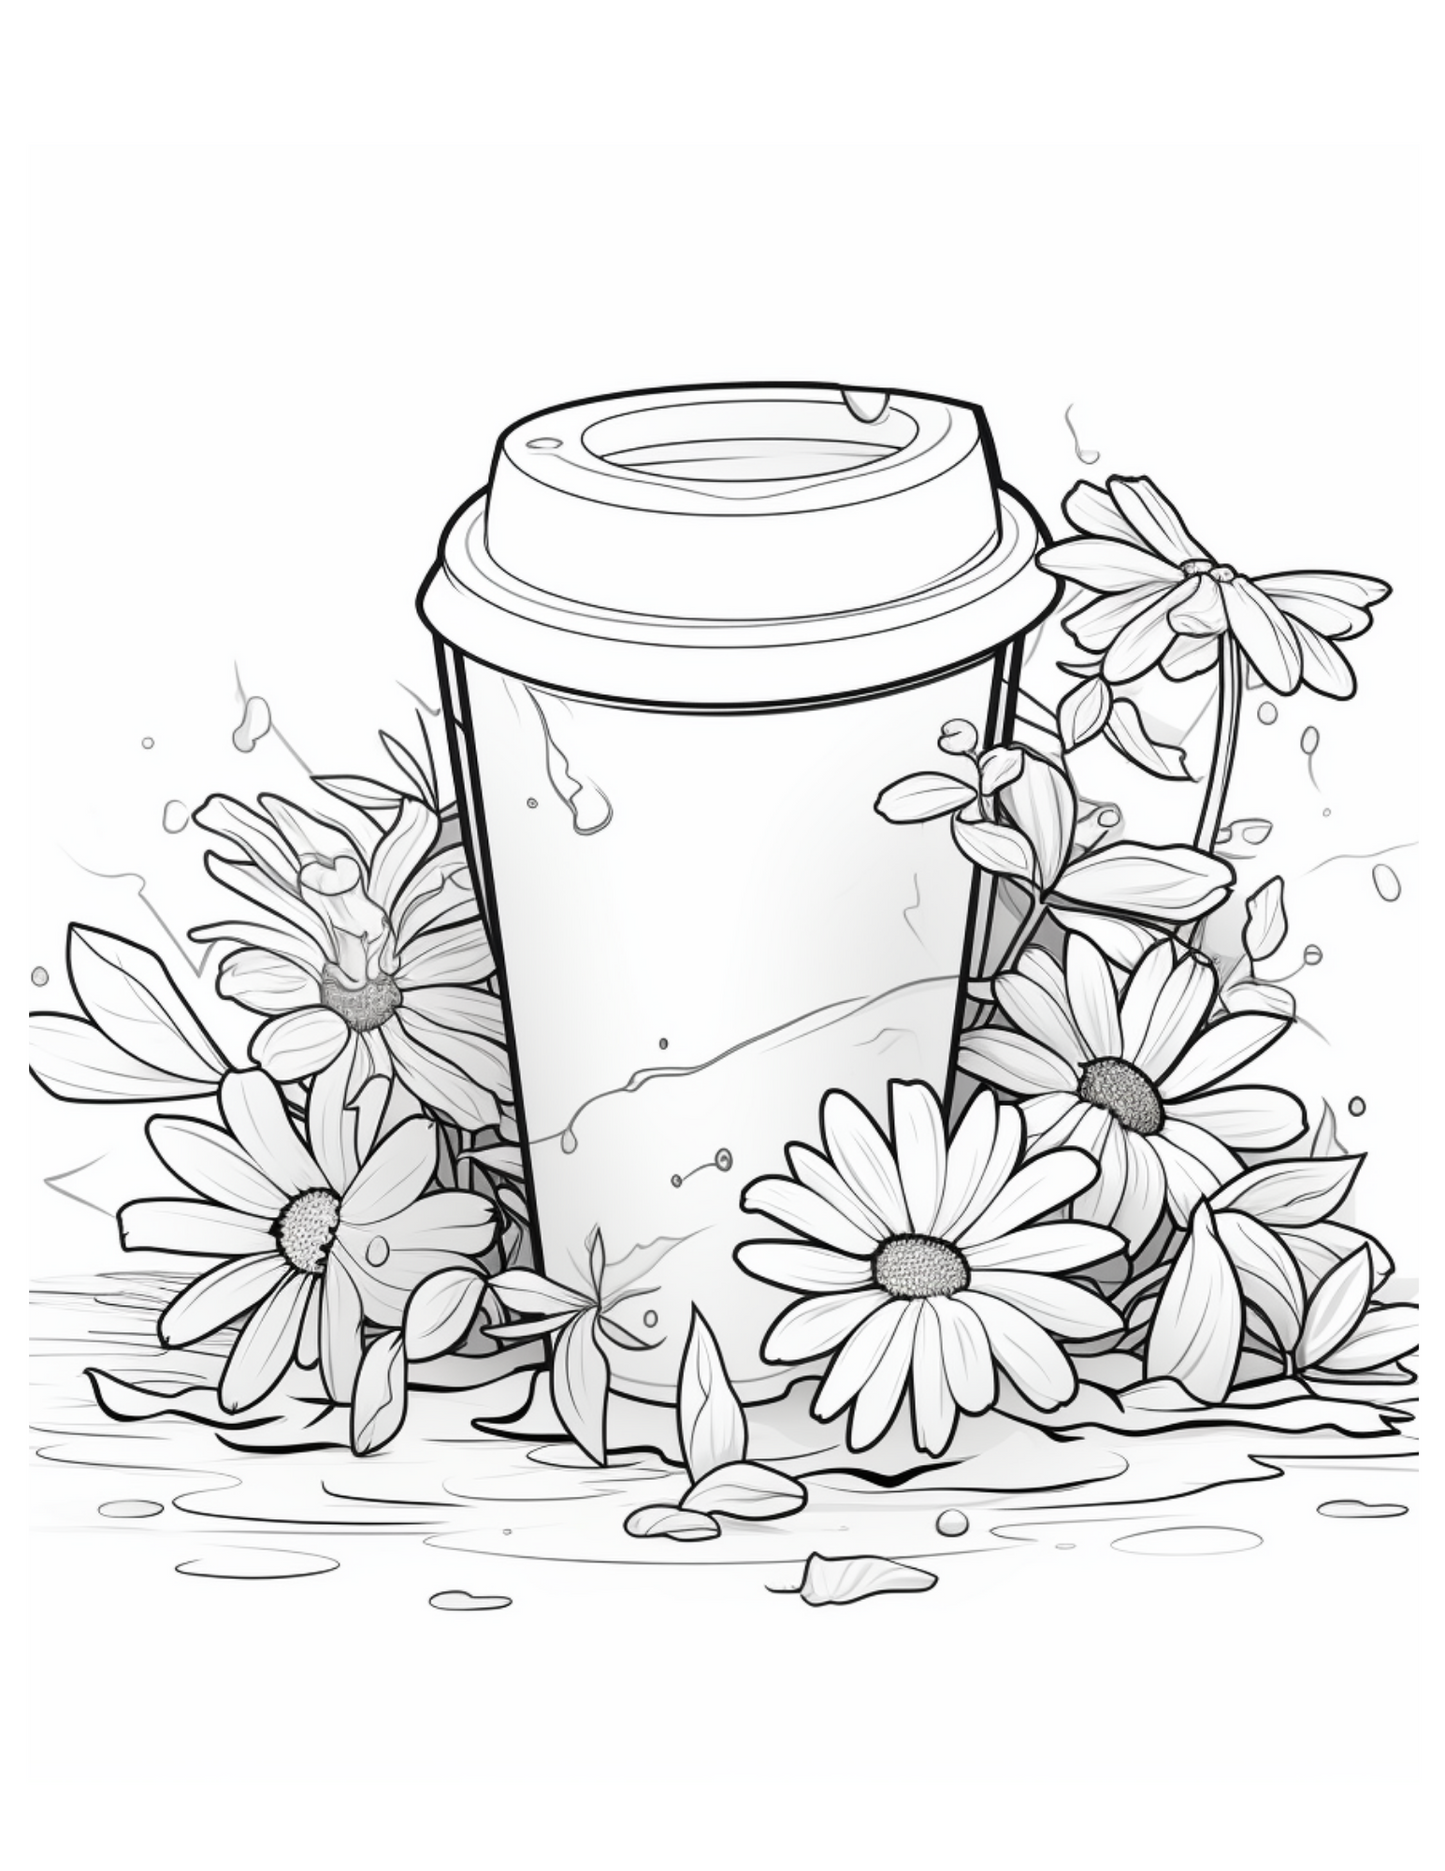 latte coloring pages, coffee coloring pages, flowers coloring pages